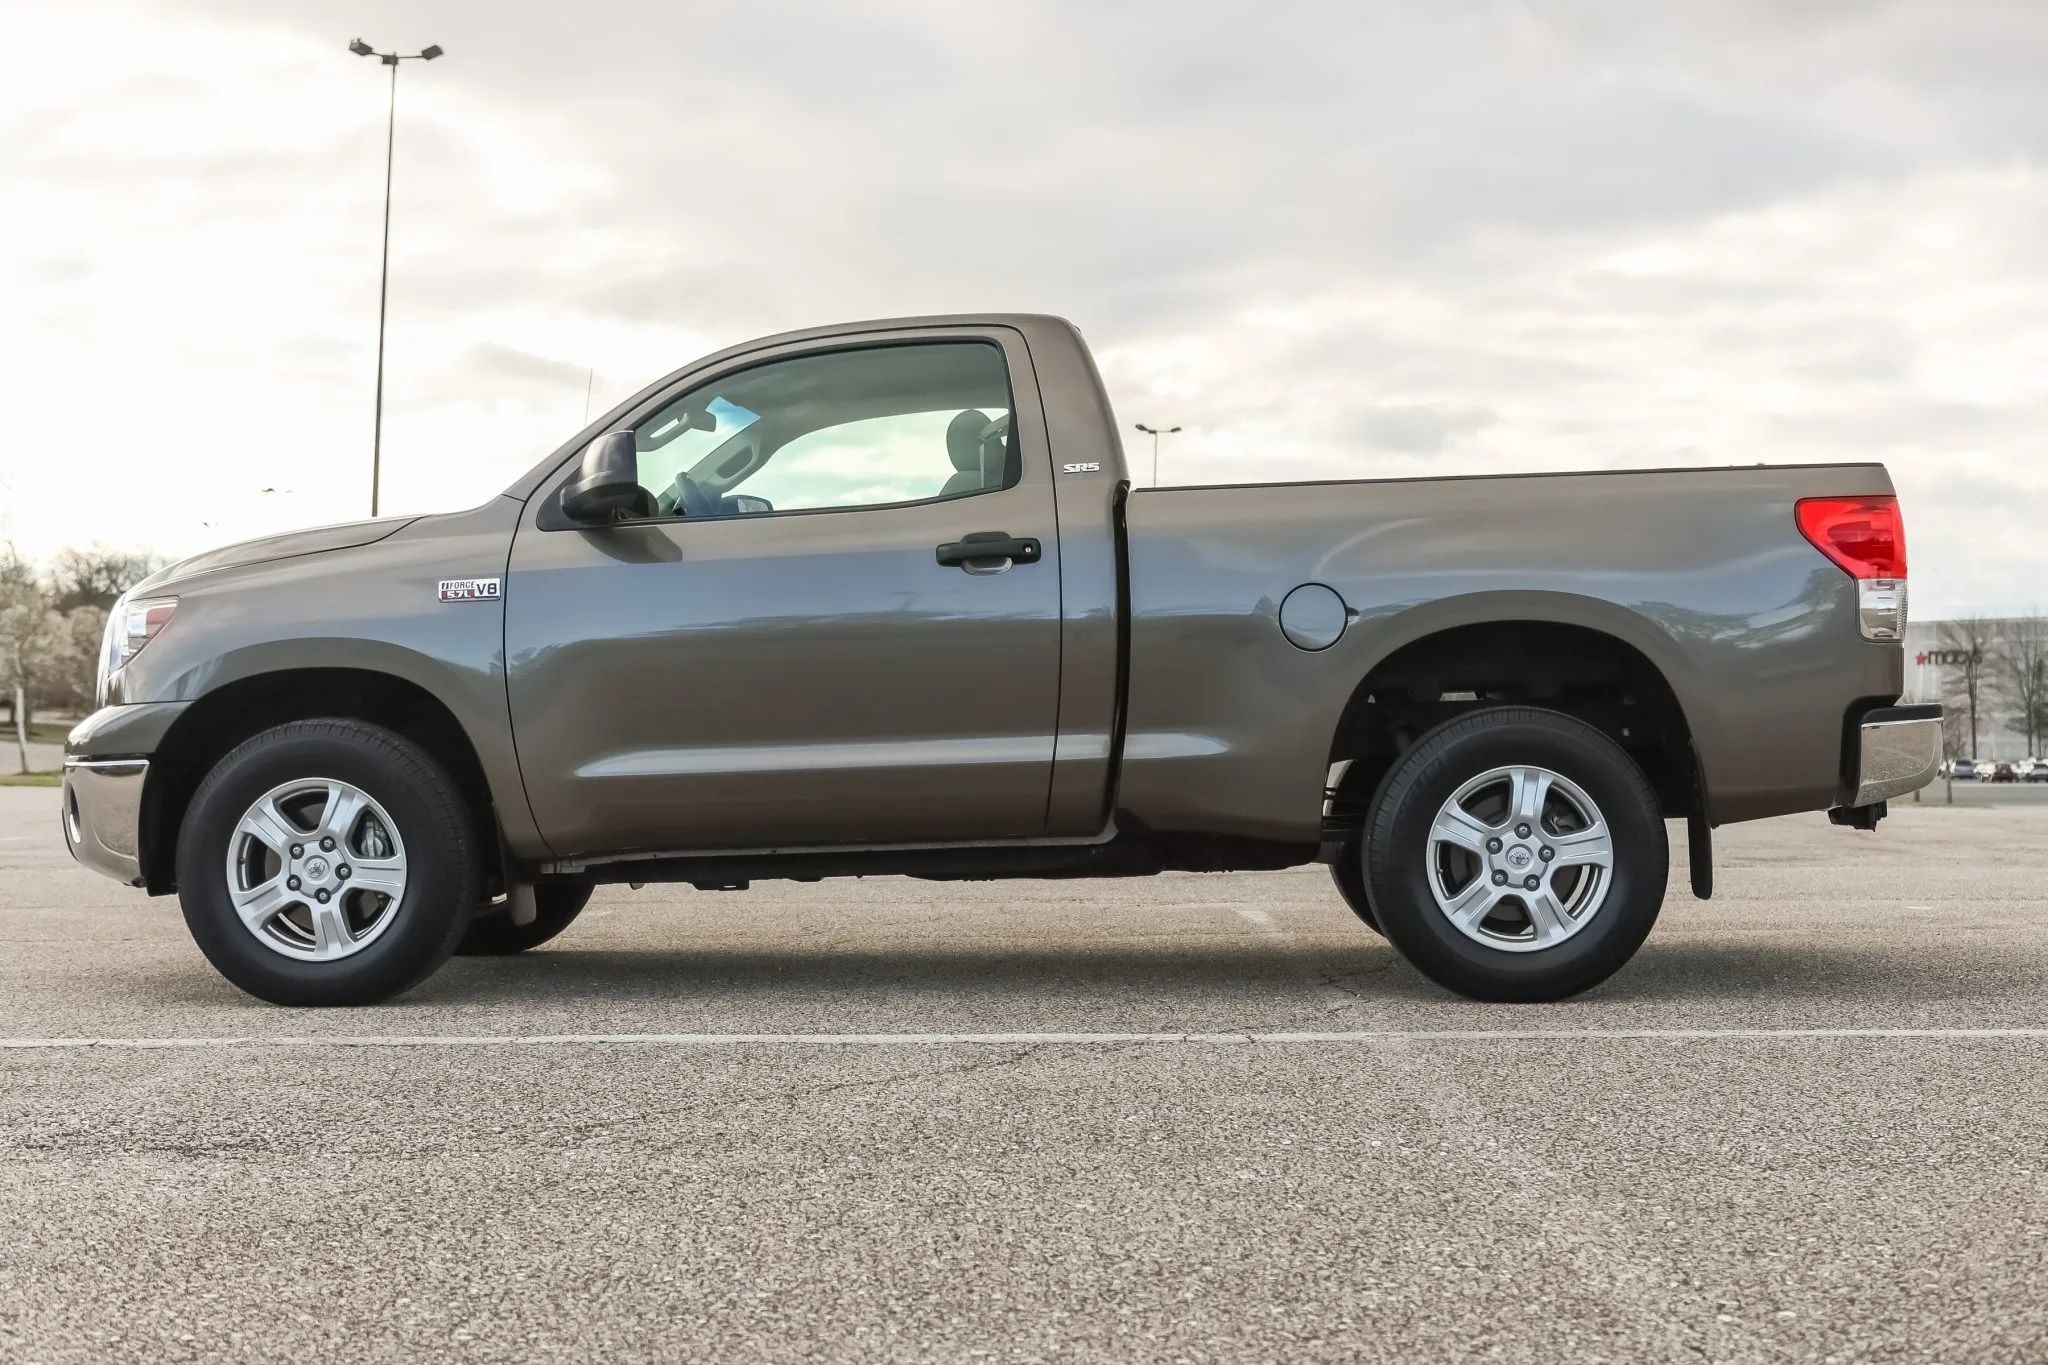 Here's What You Need To Know Before Buying A 2nd-Gen Toyota Tacoma